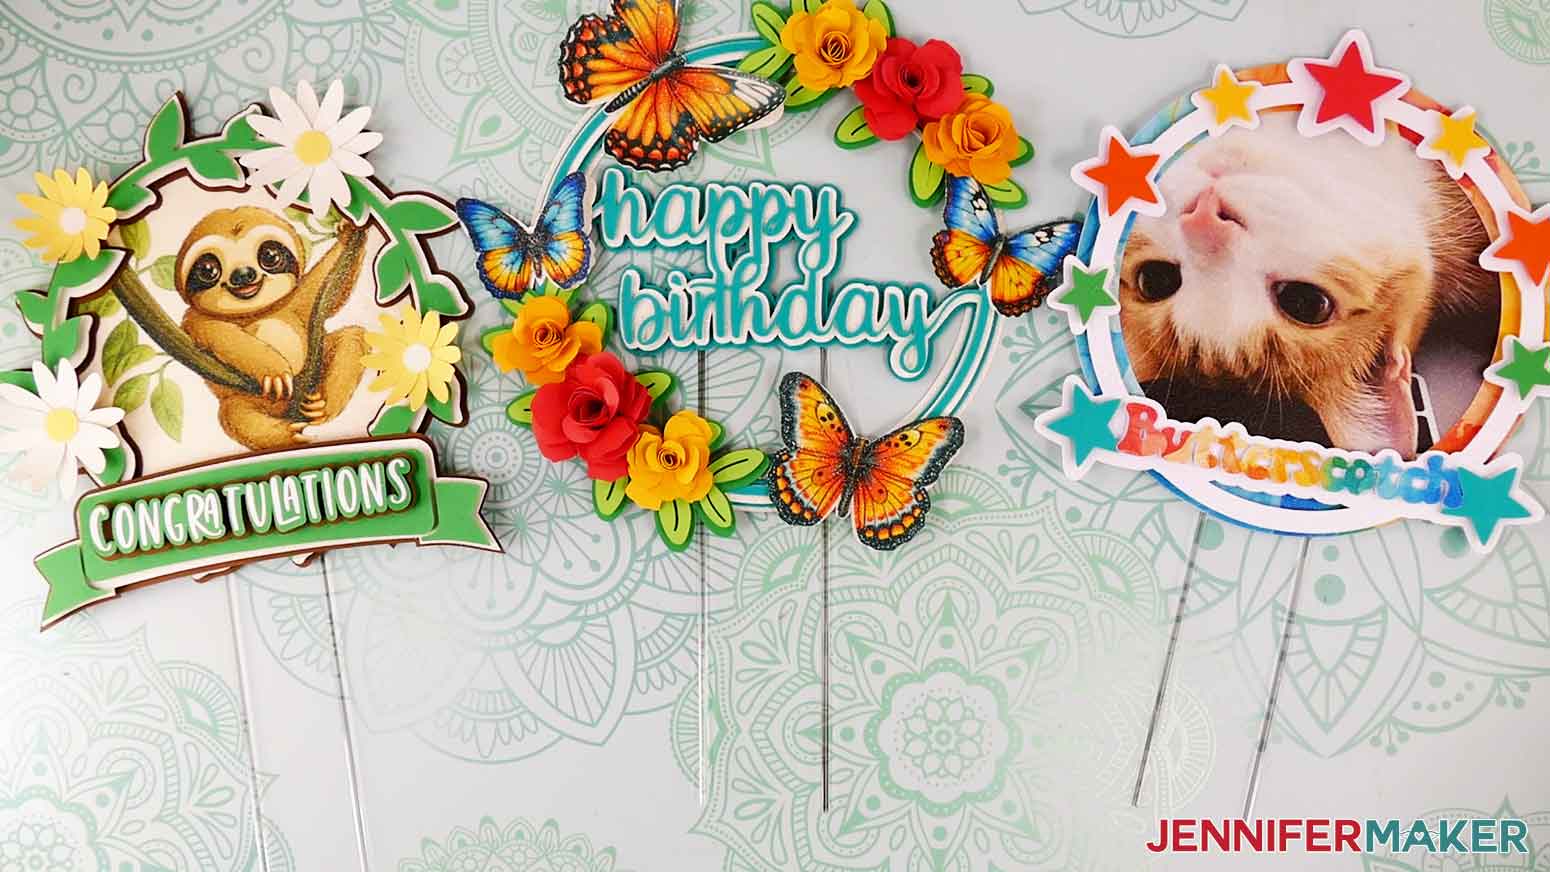 Final display of all three cake toppers with images sublimated on glitter cardstock.